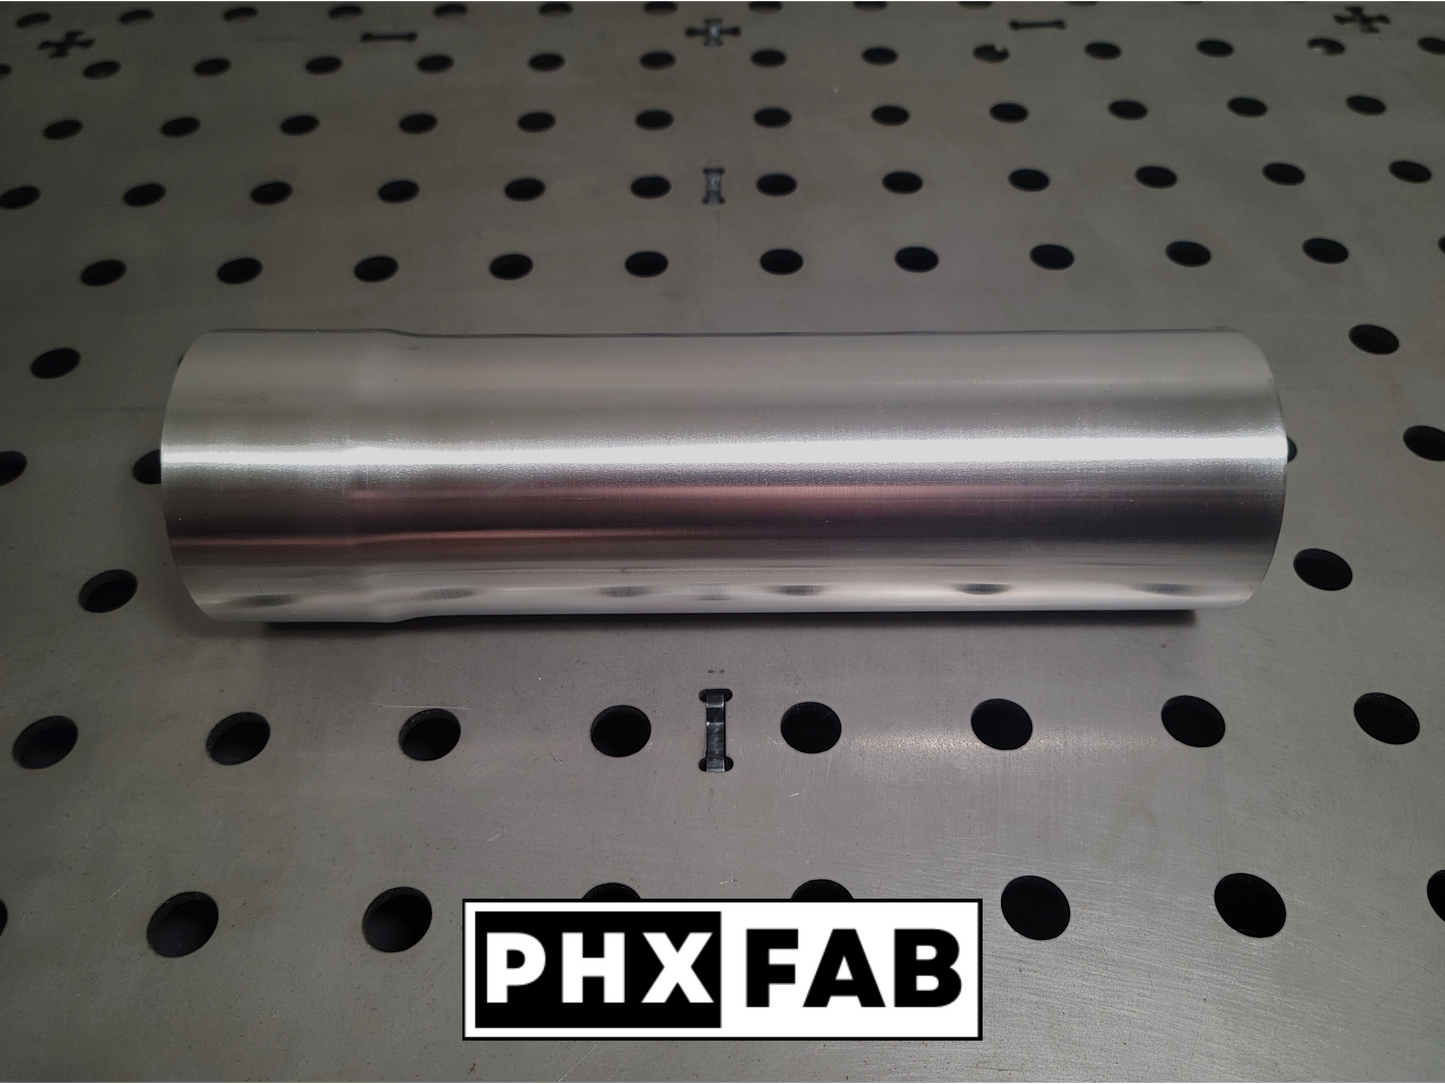 2 1/4" X 14" Stainless Steel Slip On Extension